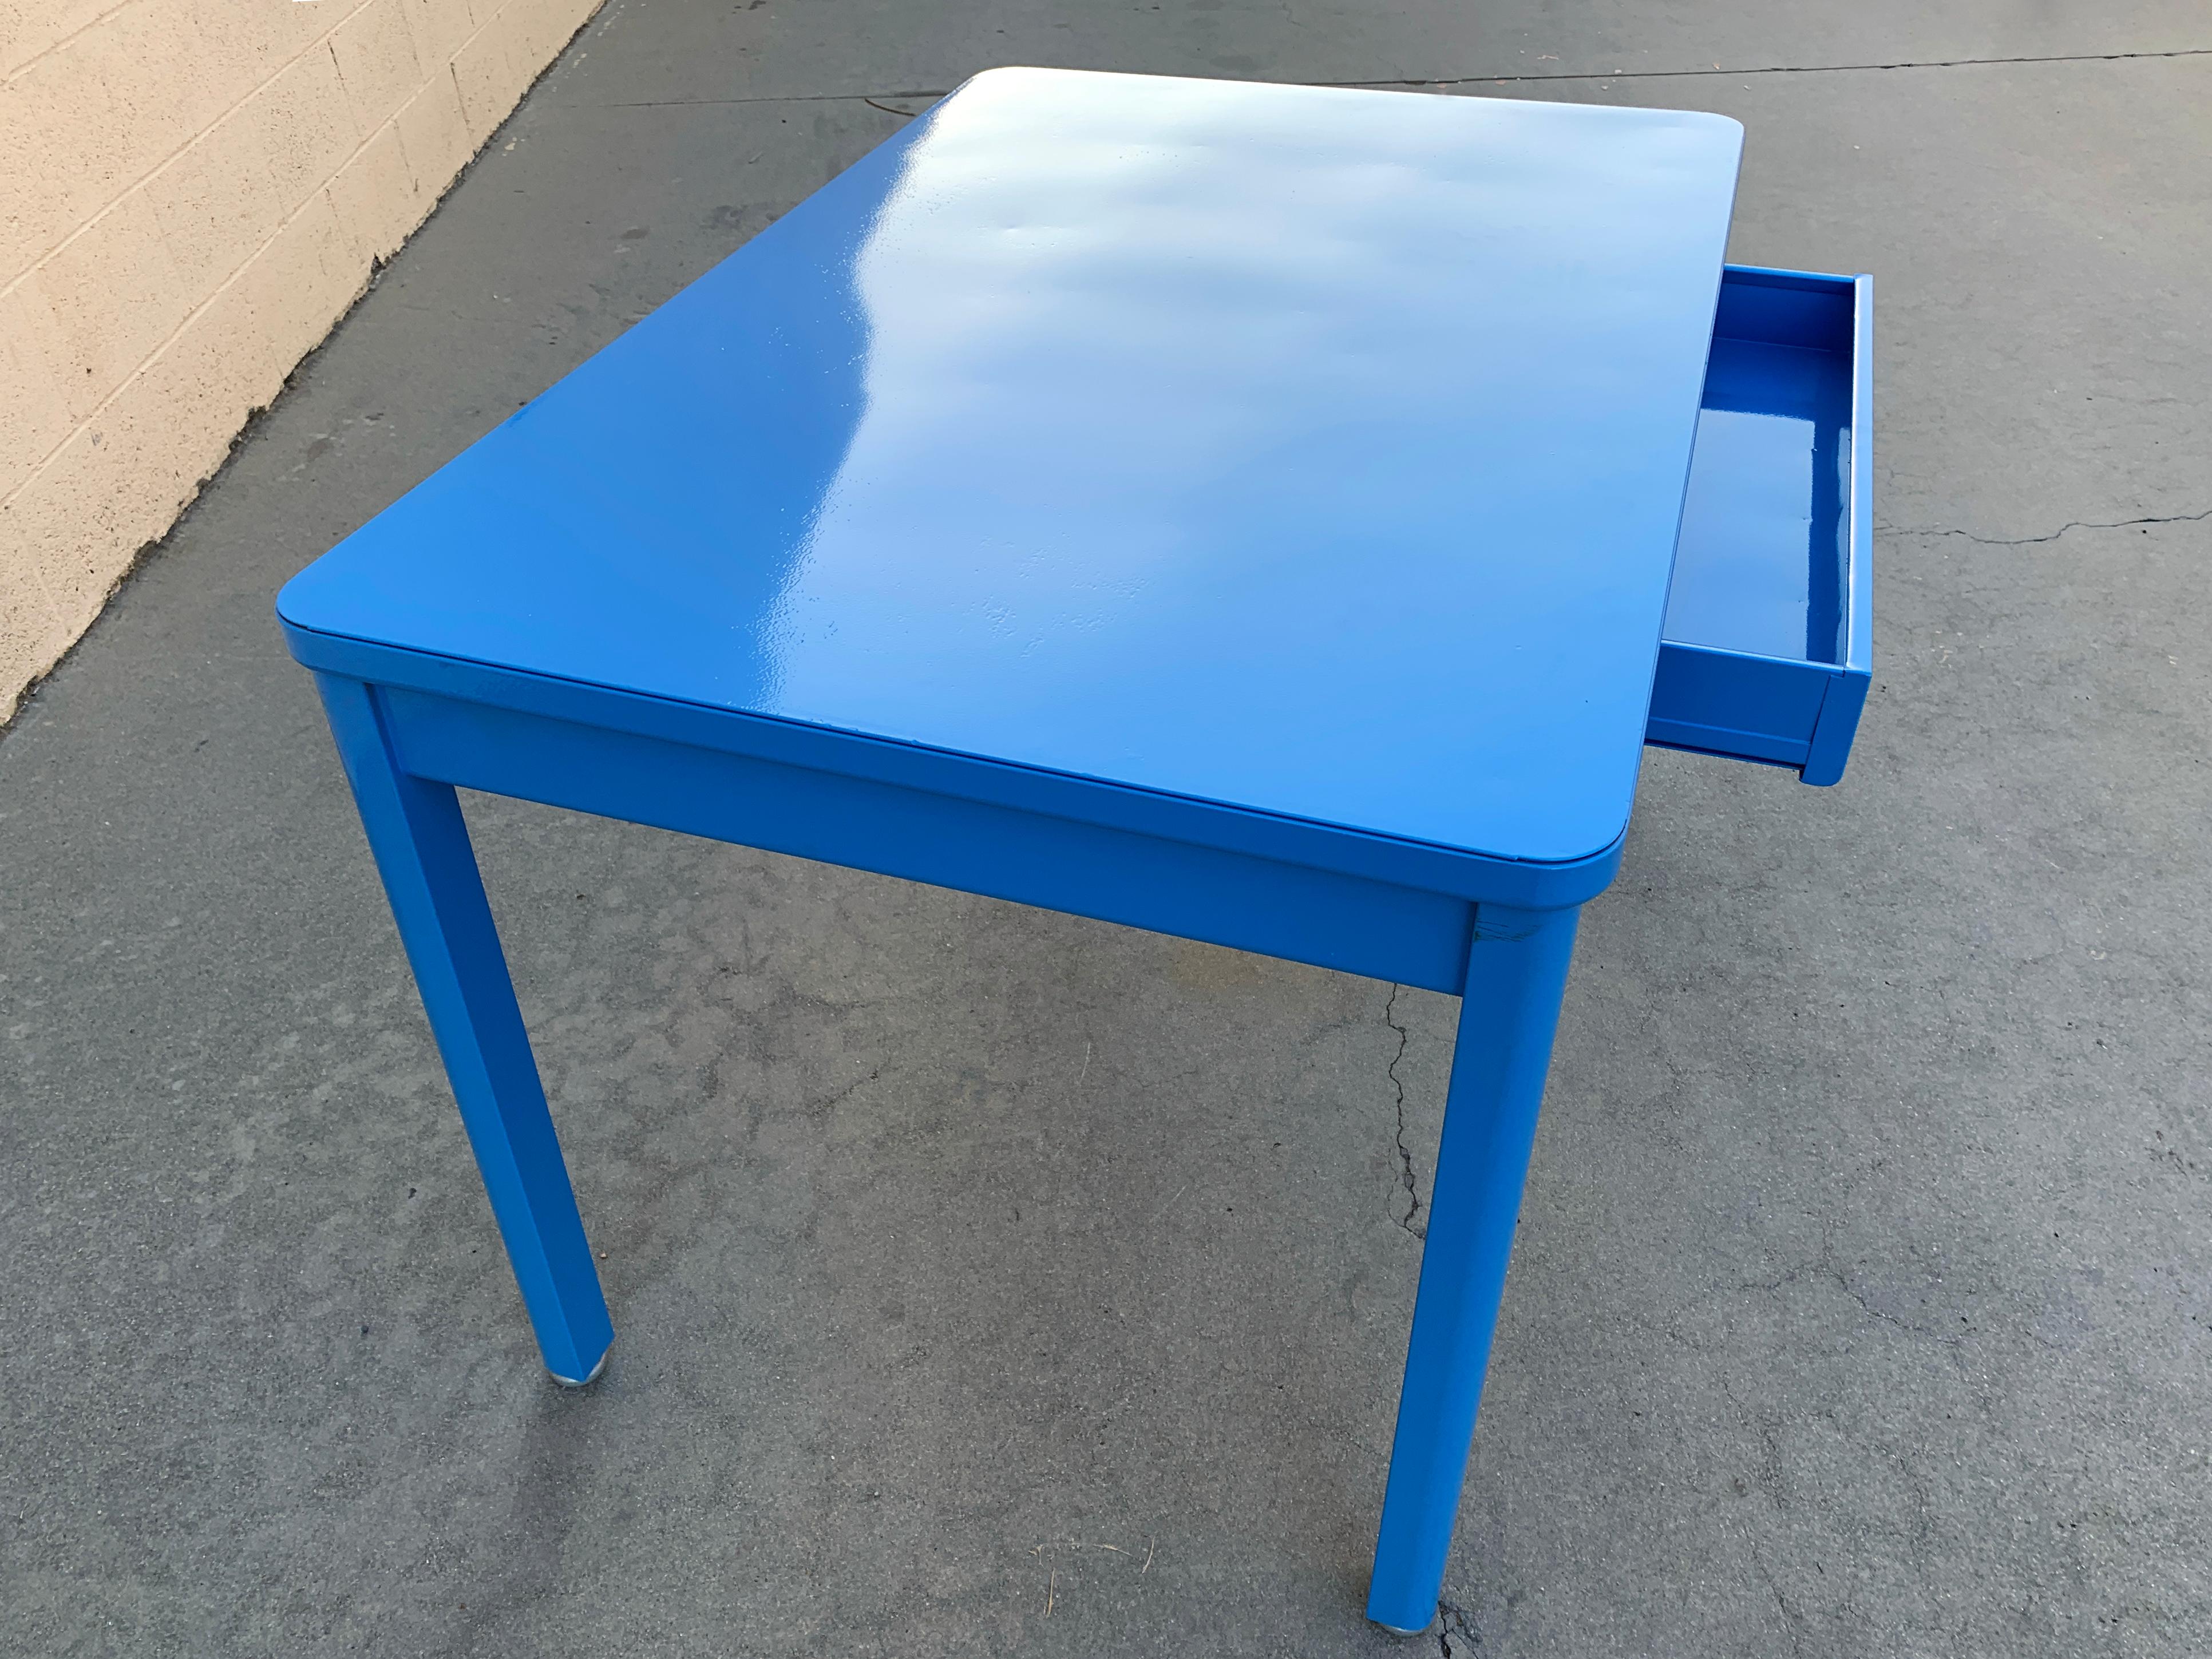 American 1960s Tanker Table by Steelcase, Refinished in Bright Blue